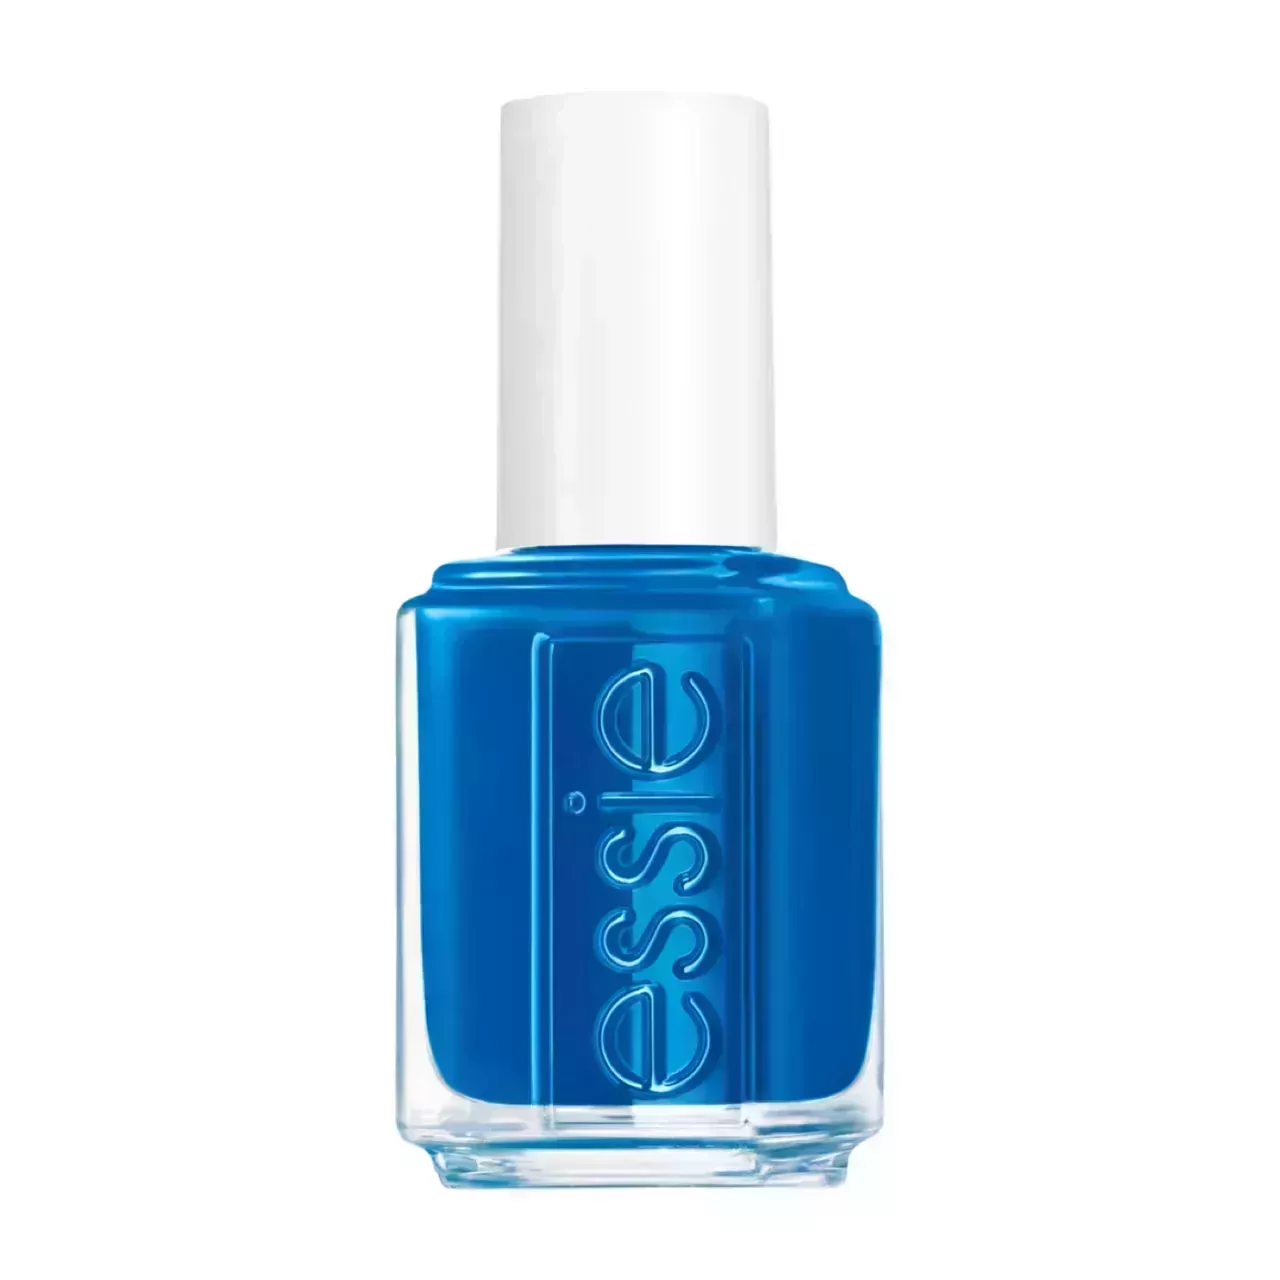 Essie Nail Lacquer in Juicy Details